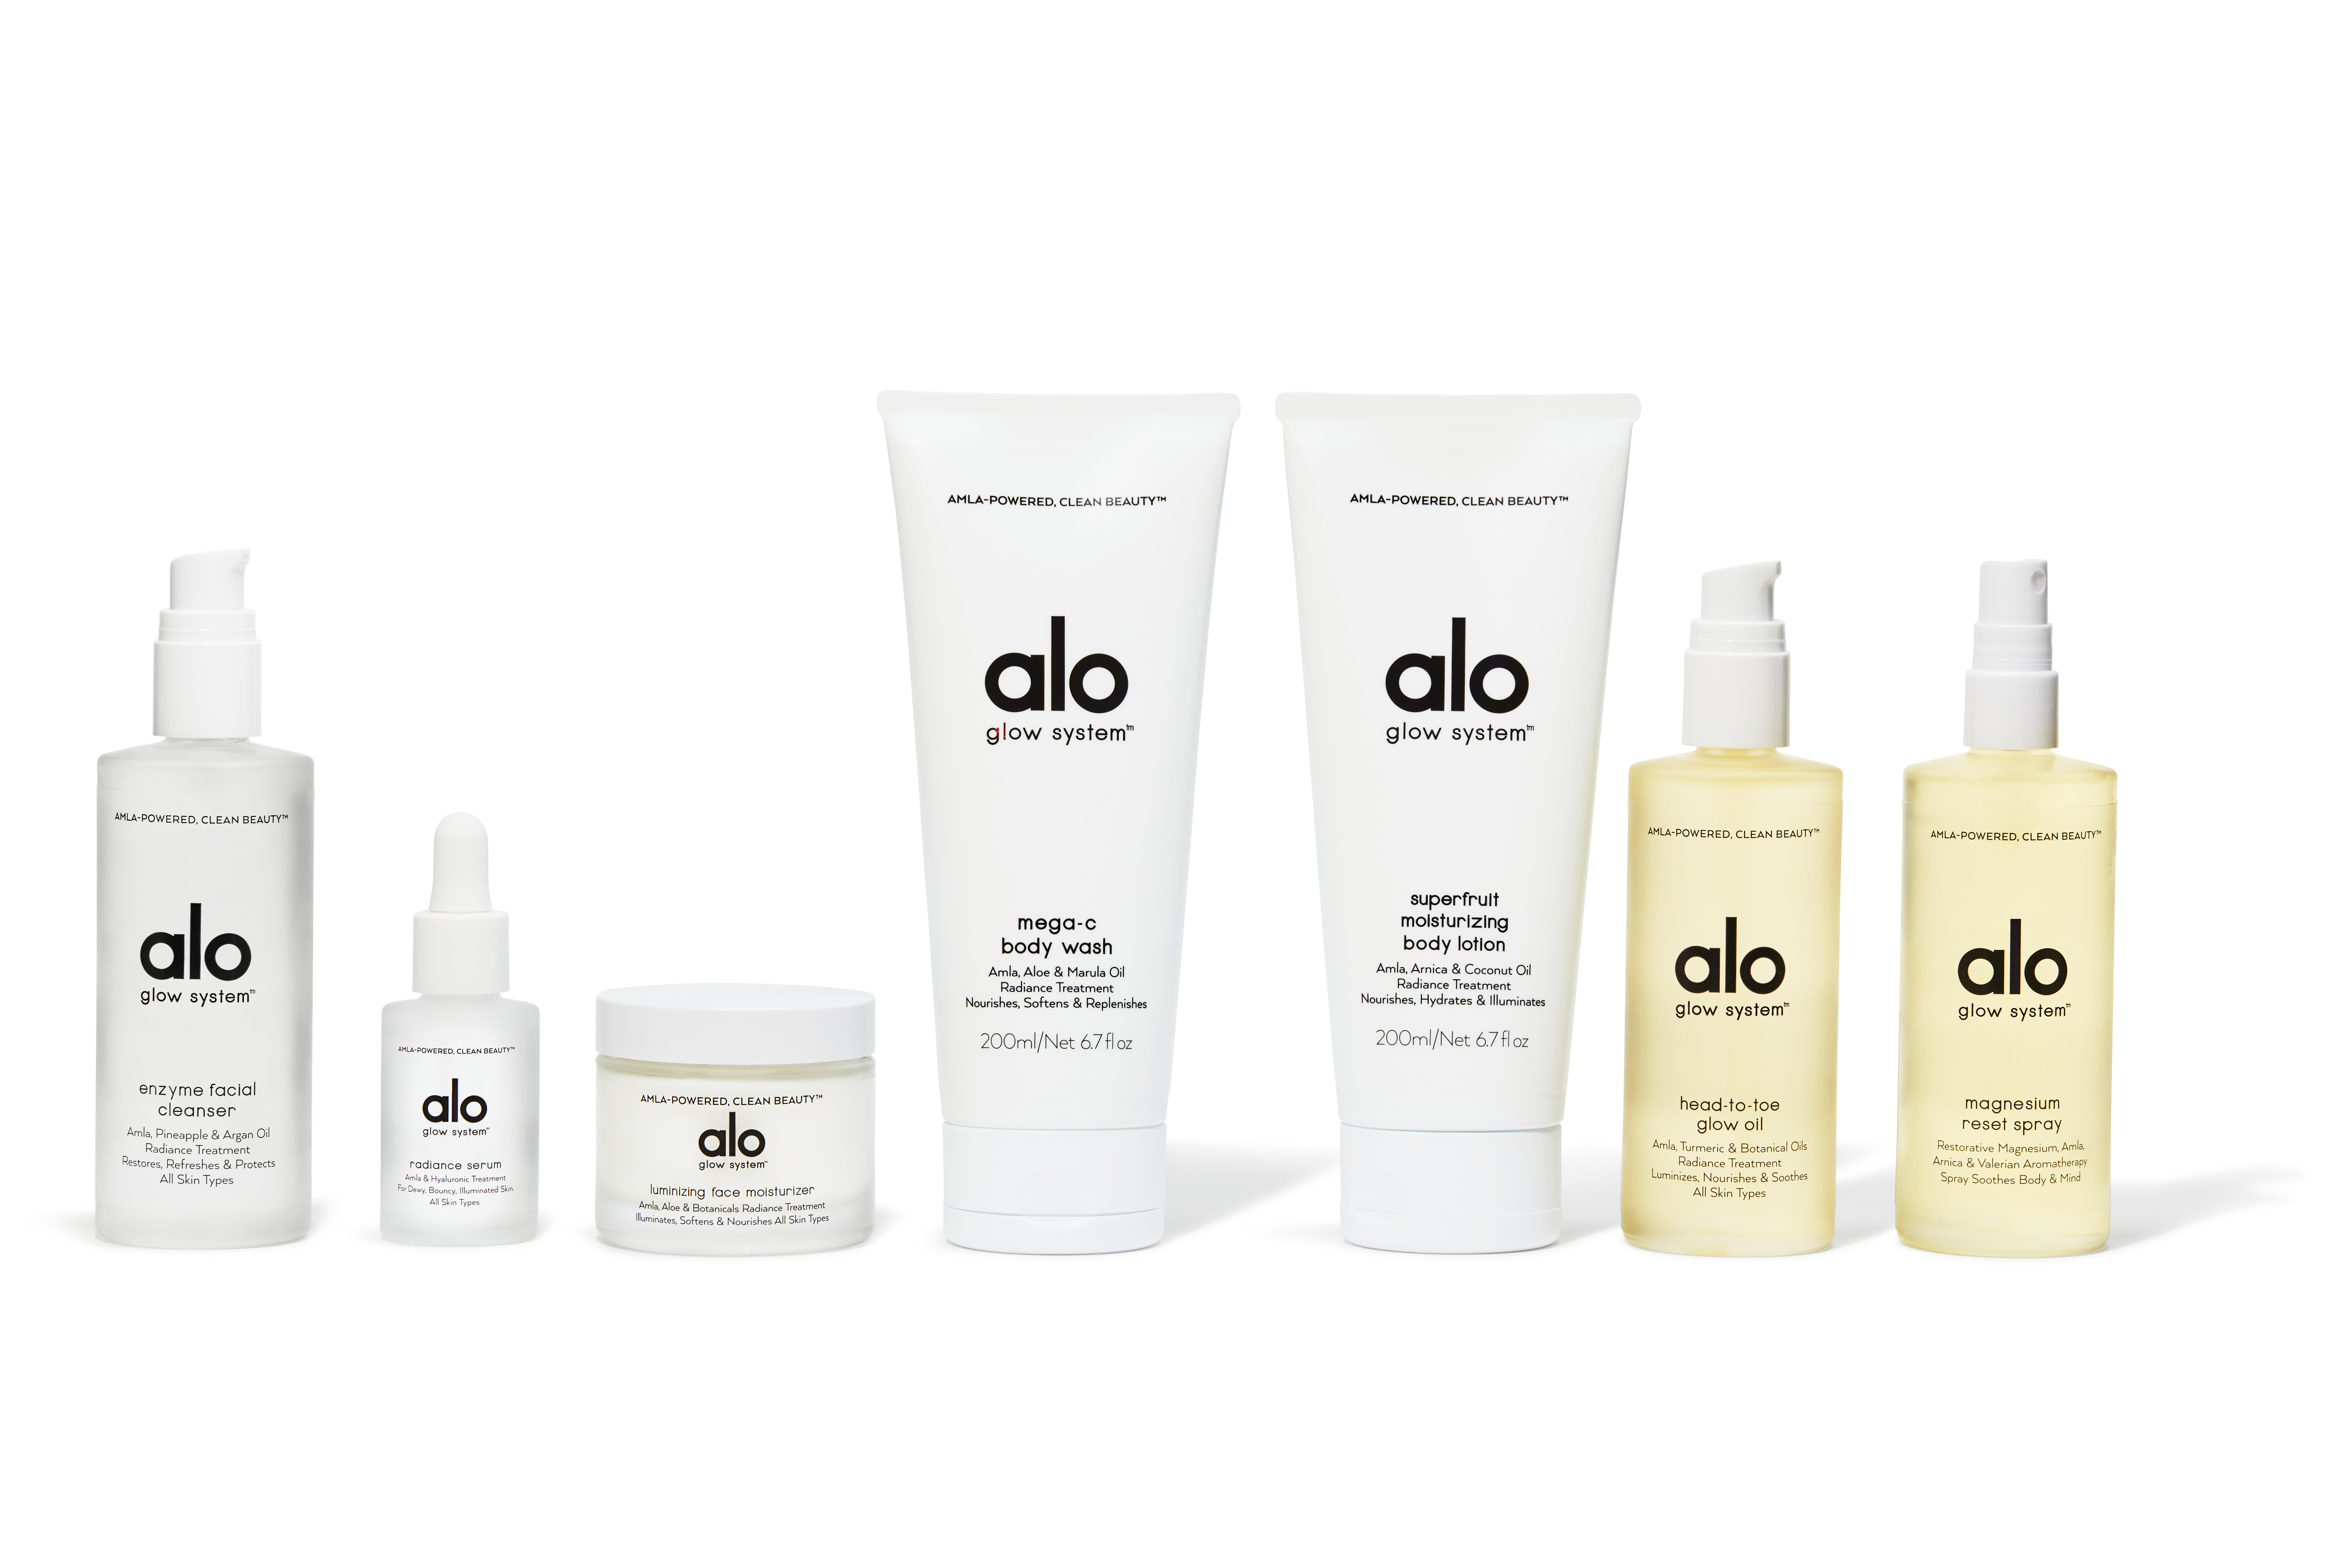 Activewear Pioneer Alo Yoga Enters Beauty and Wellness Category